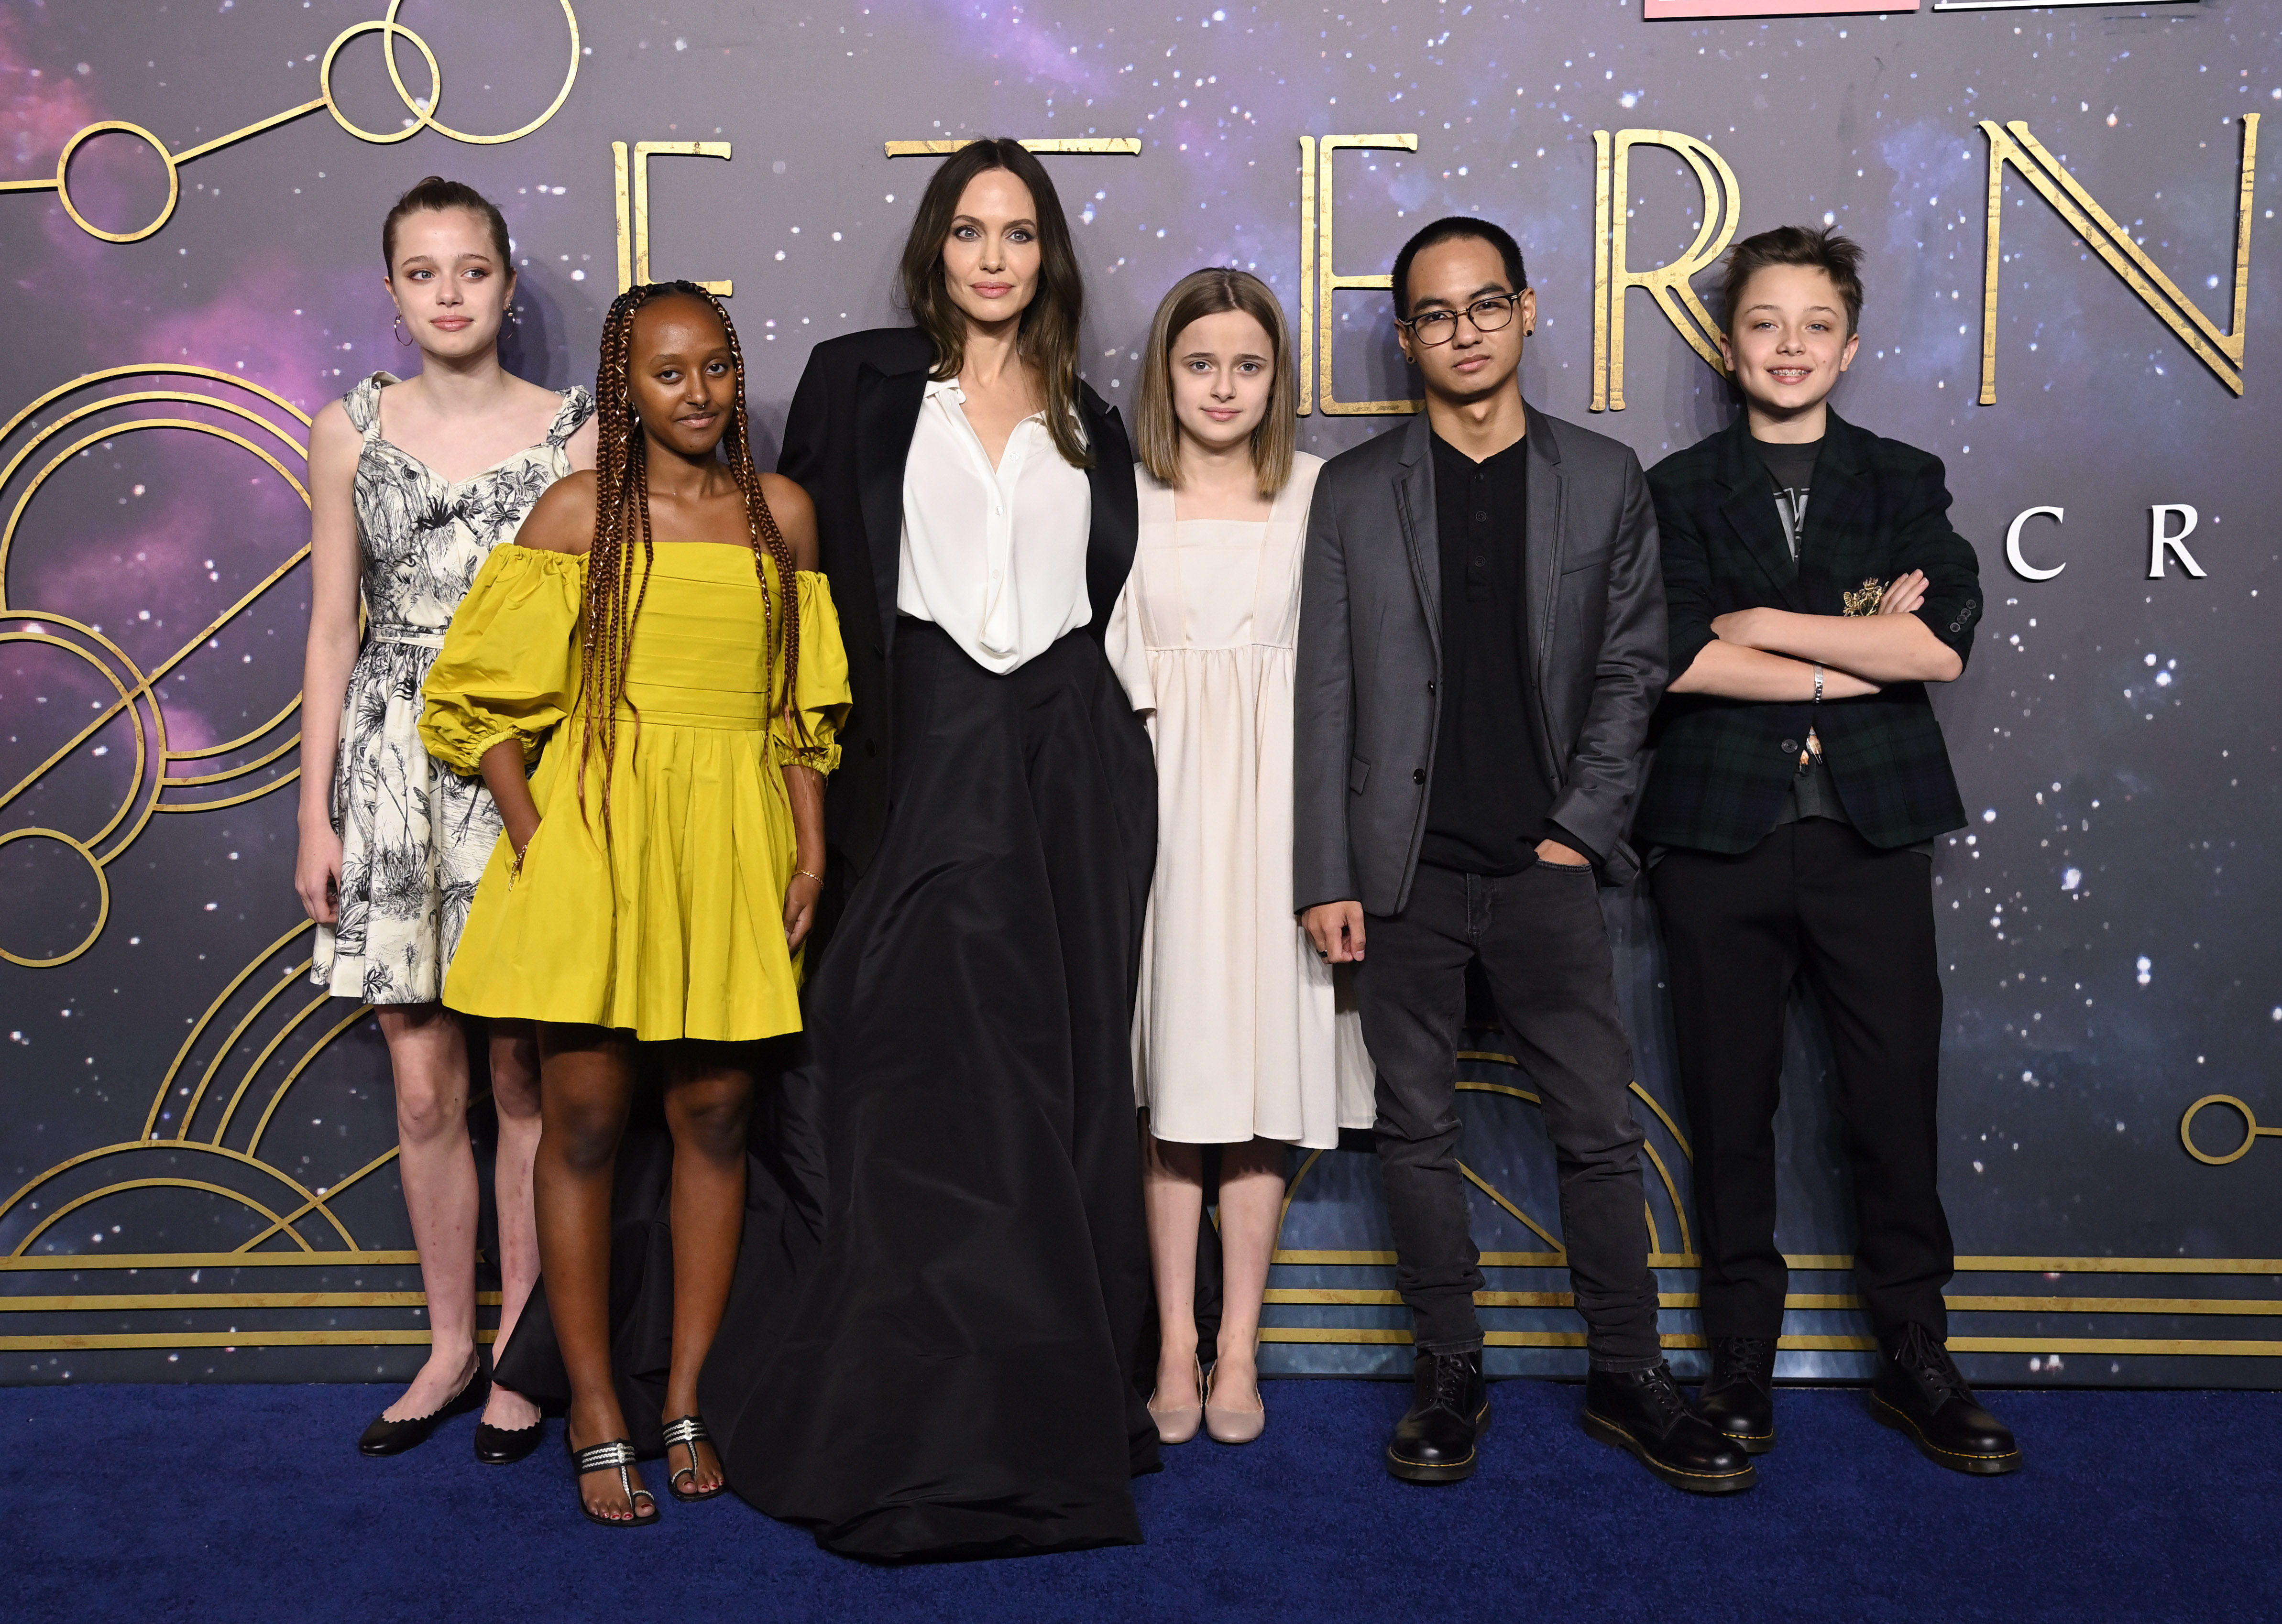 Shiloh, Zahara, Angelina Jolie, Vivienne, Maddox, and Knox Jolie-Pitt attend the "The Eternals" UK Premiere at BFI IMAX Waterloo in London, England, on October 27, 2021. | Source: Getty Images